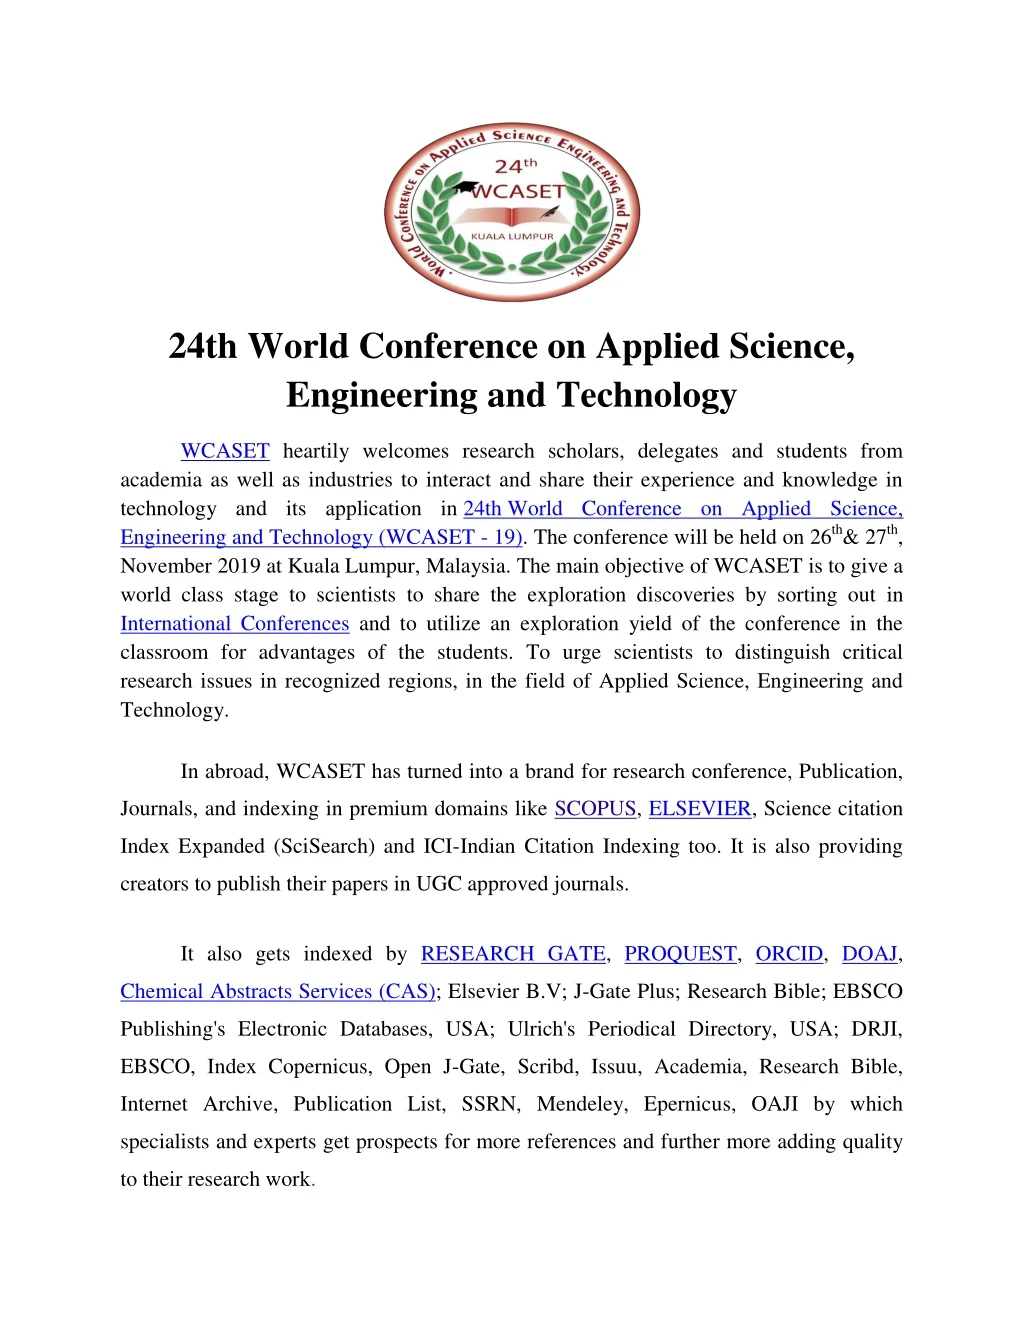 24th world conference on applied science